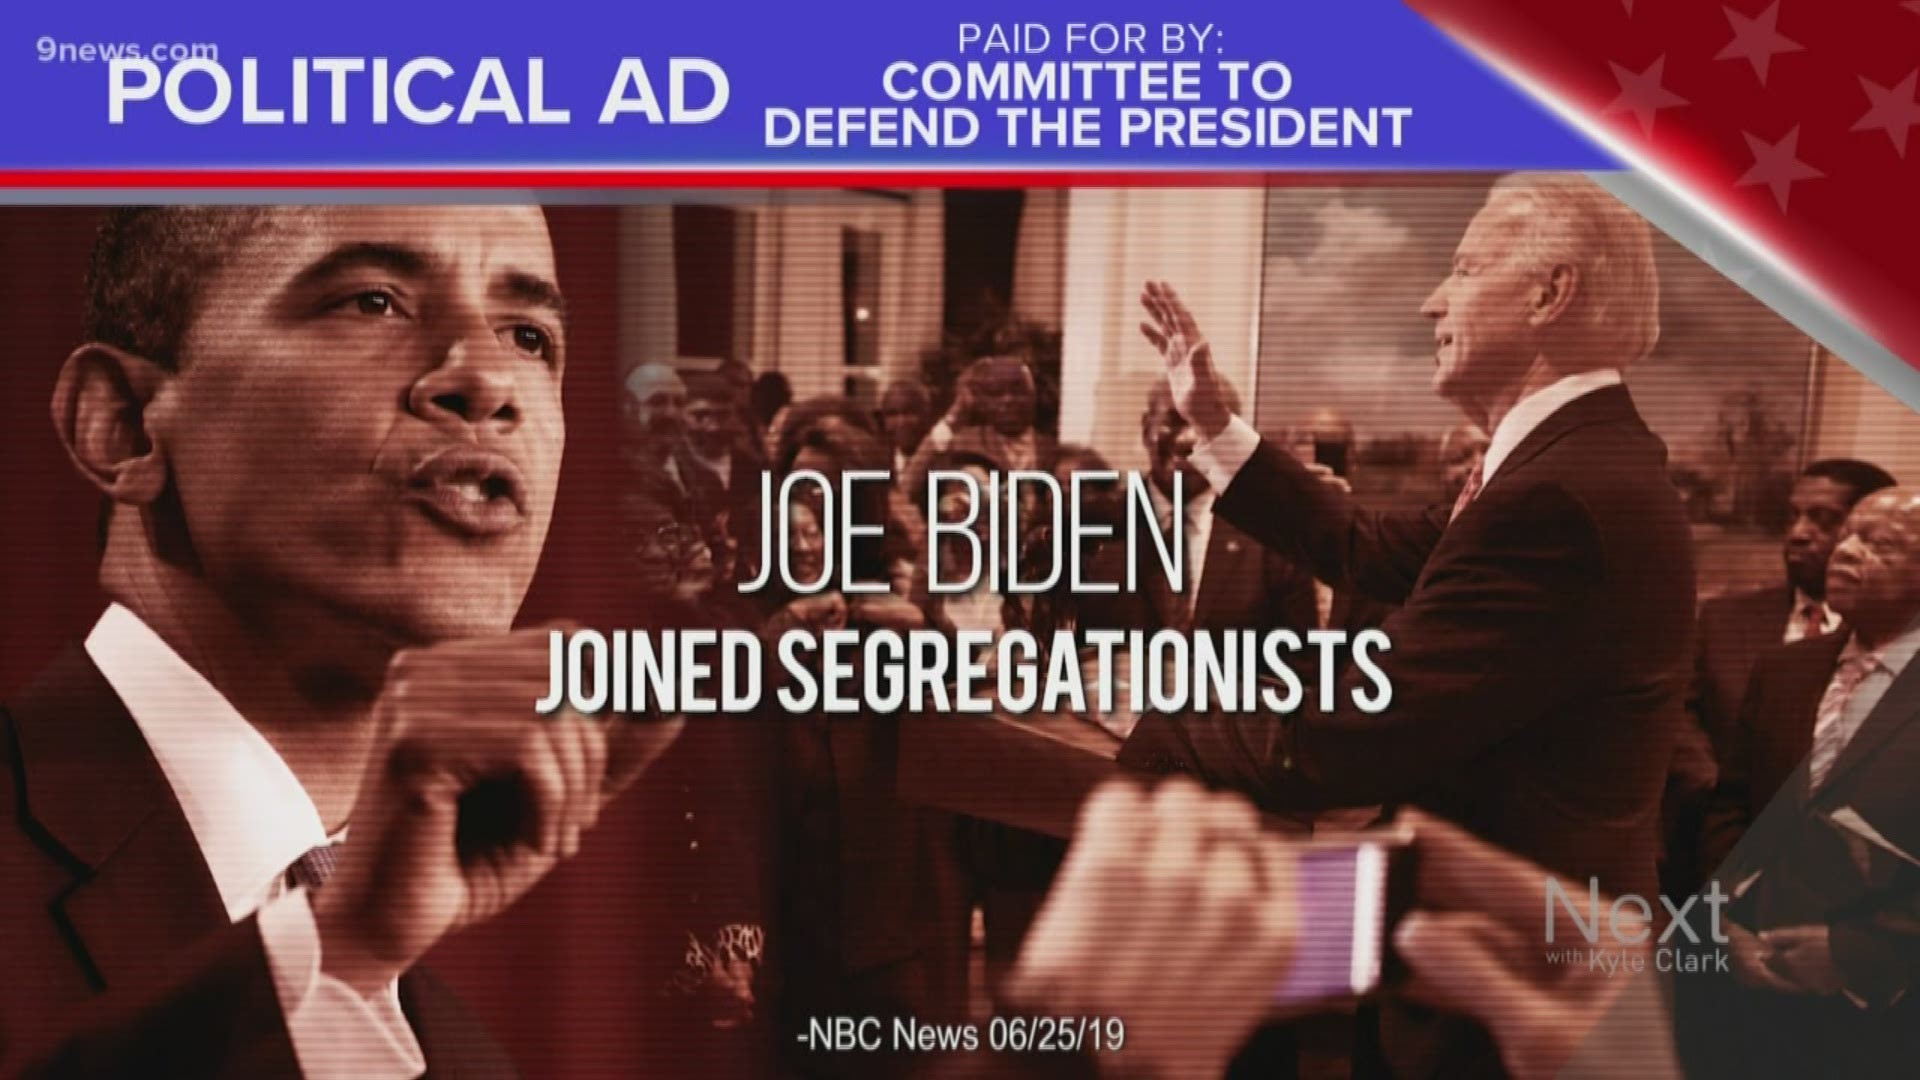 The ad, being run by the "Committee to Defend the President" is airing in South Carolina.